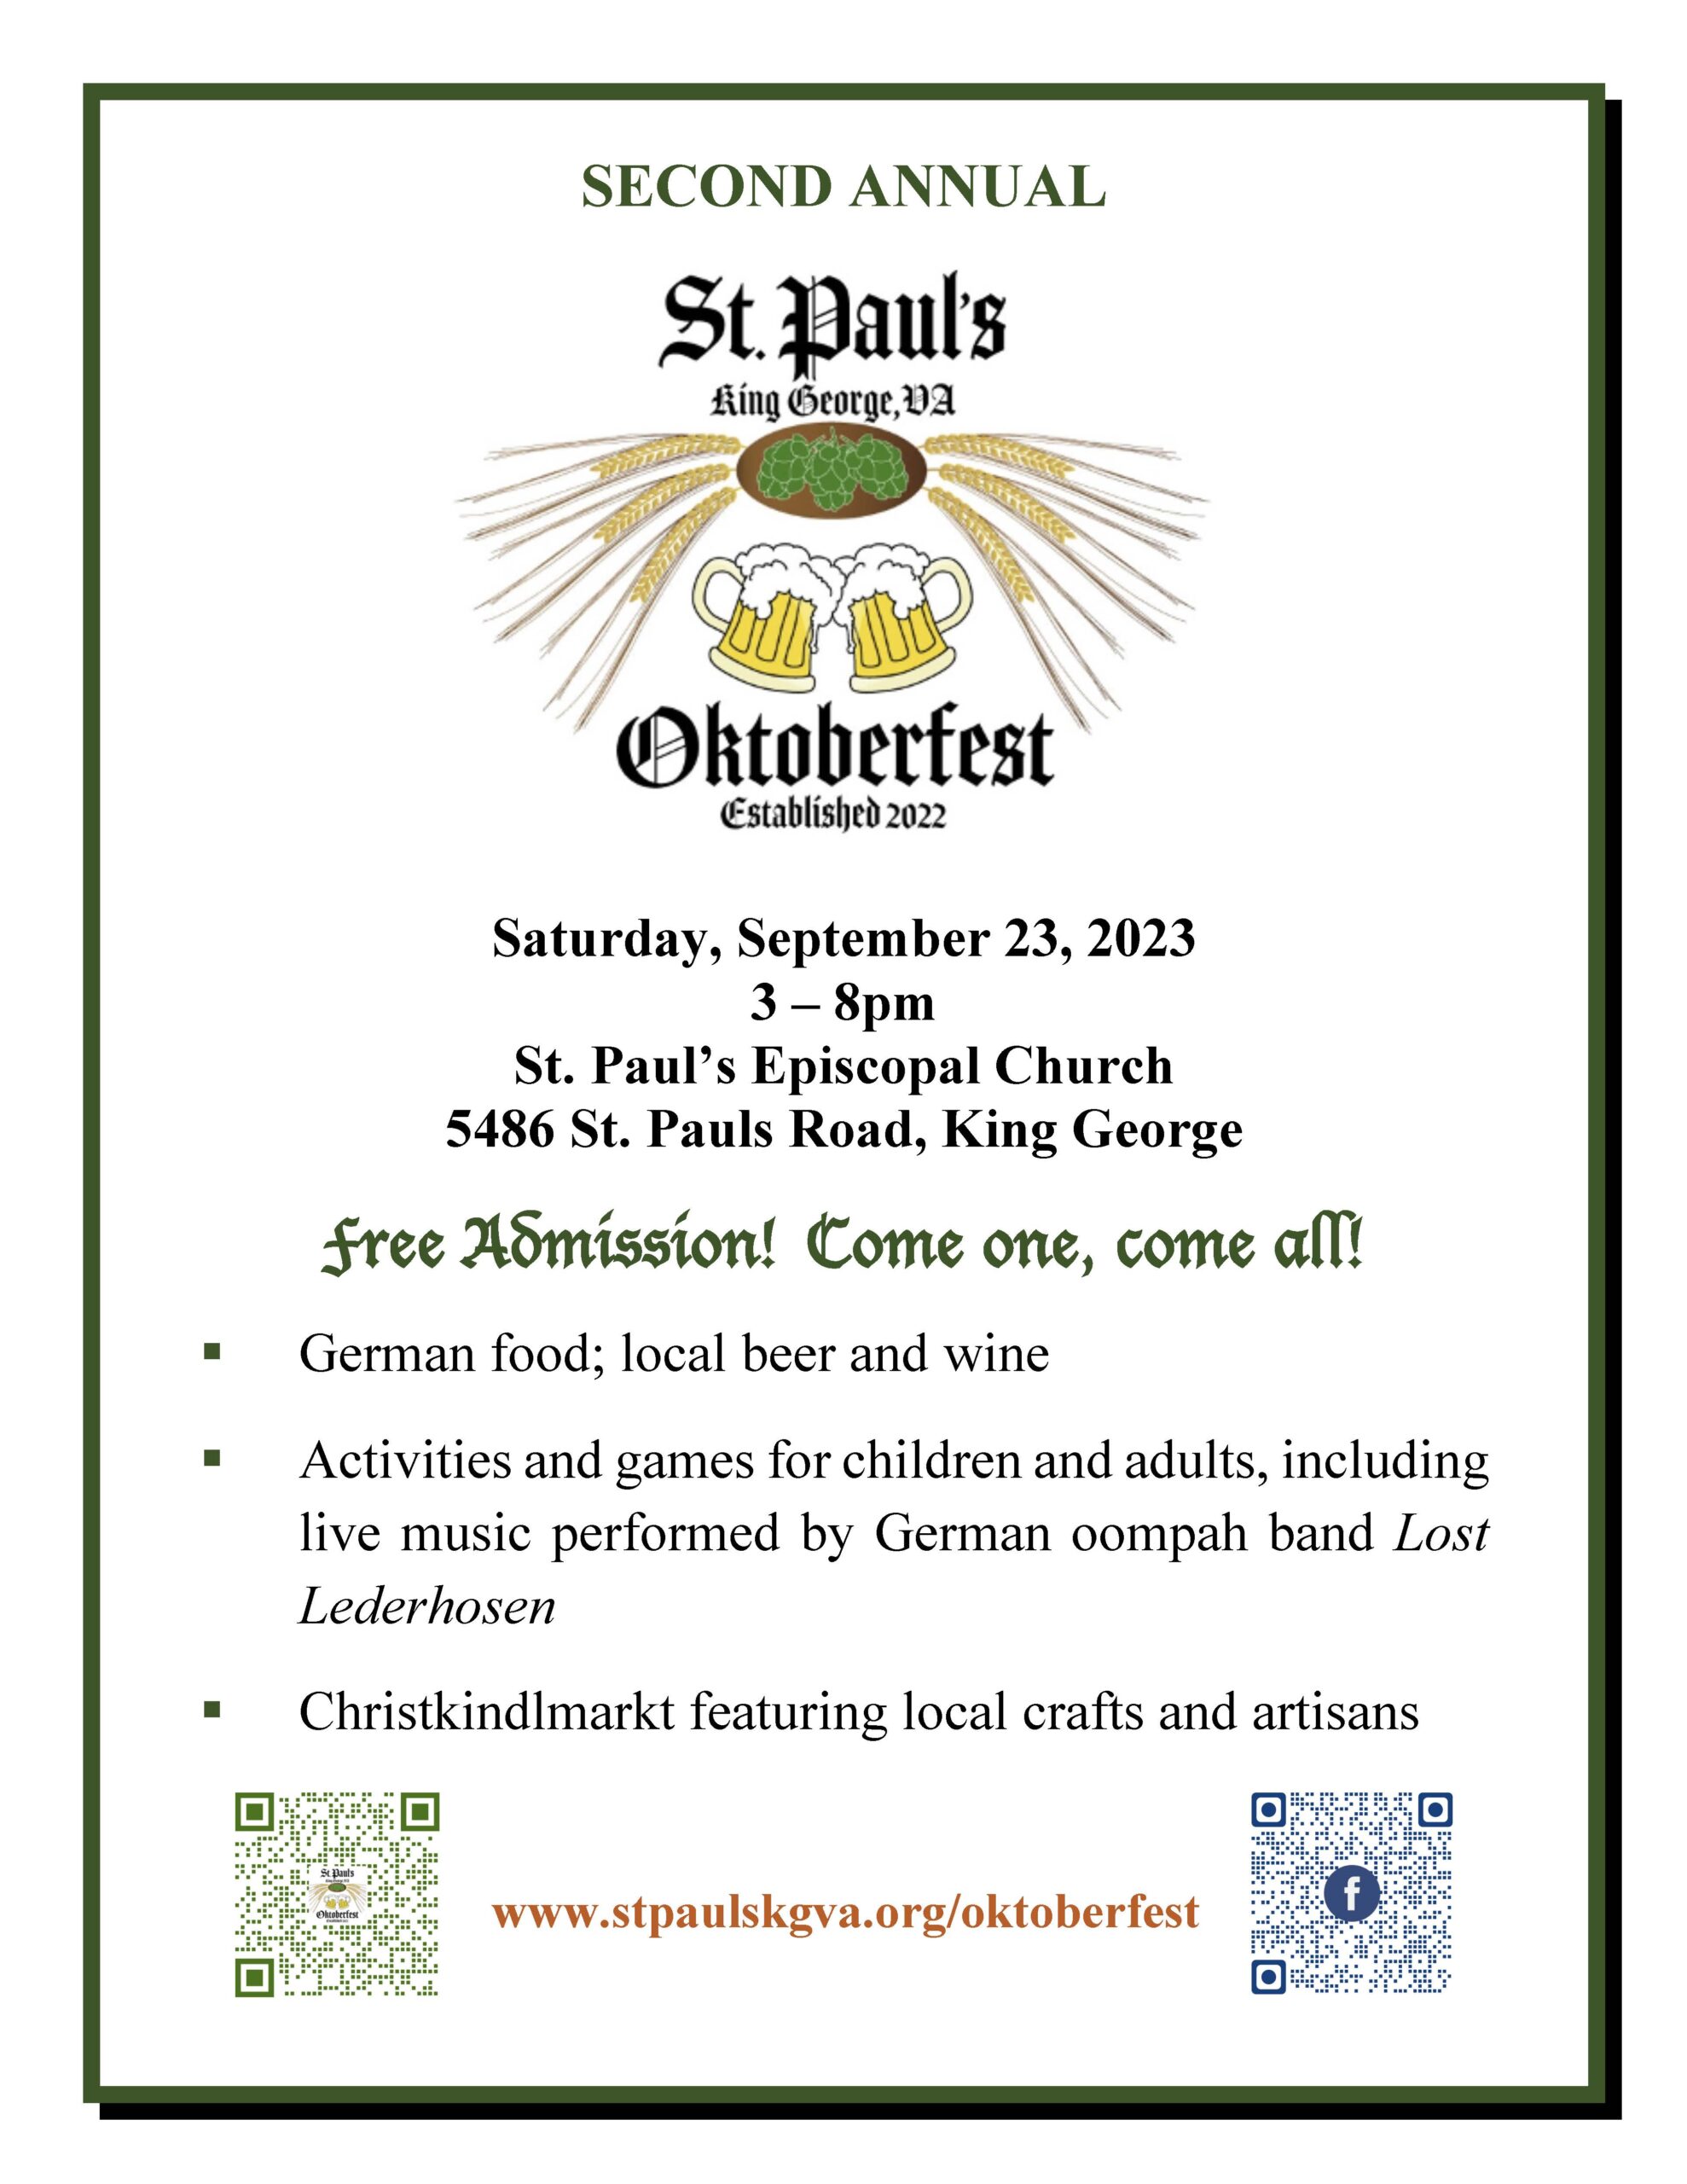 <h1 class="tribe-events-single-event-title">St. Paul’s Oktoberfest, King George</h1>